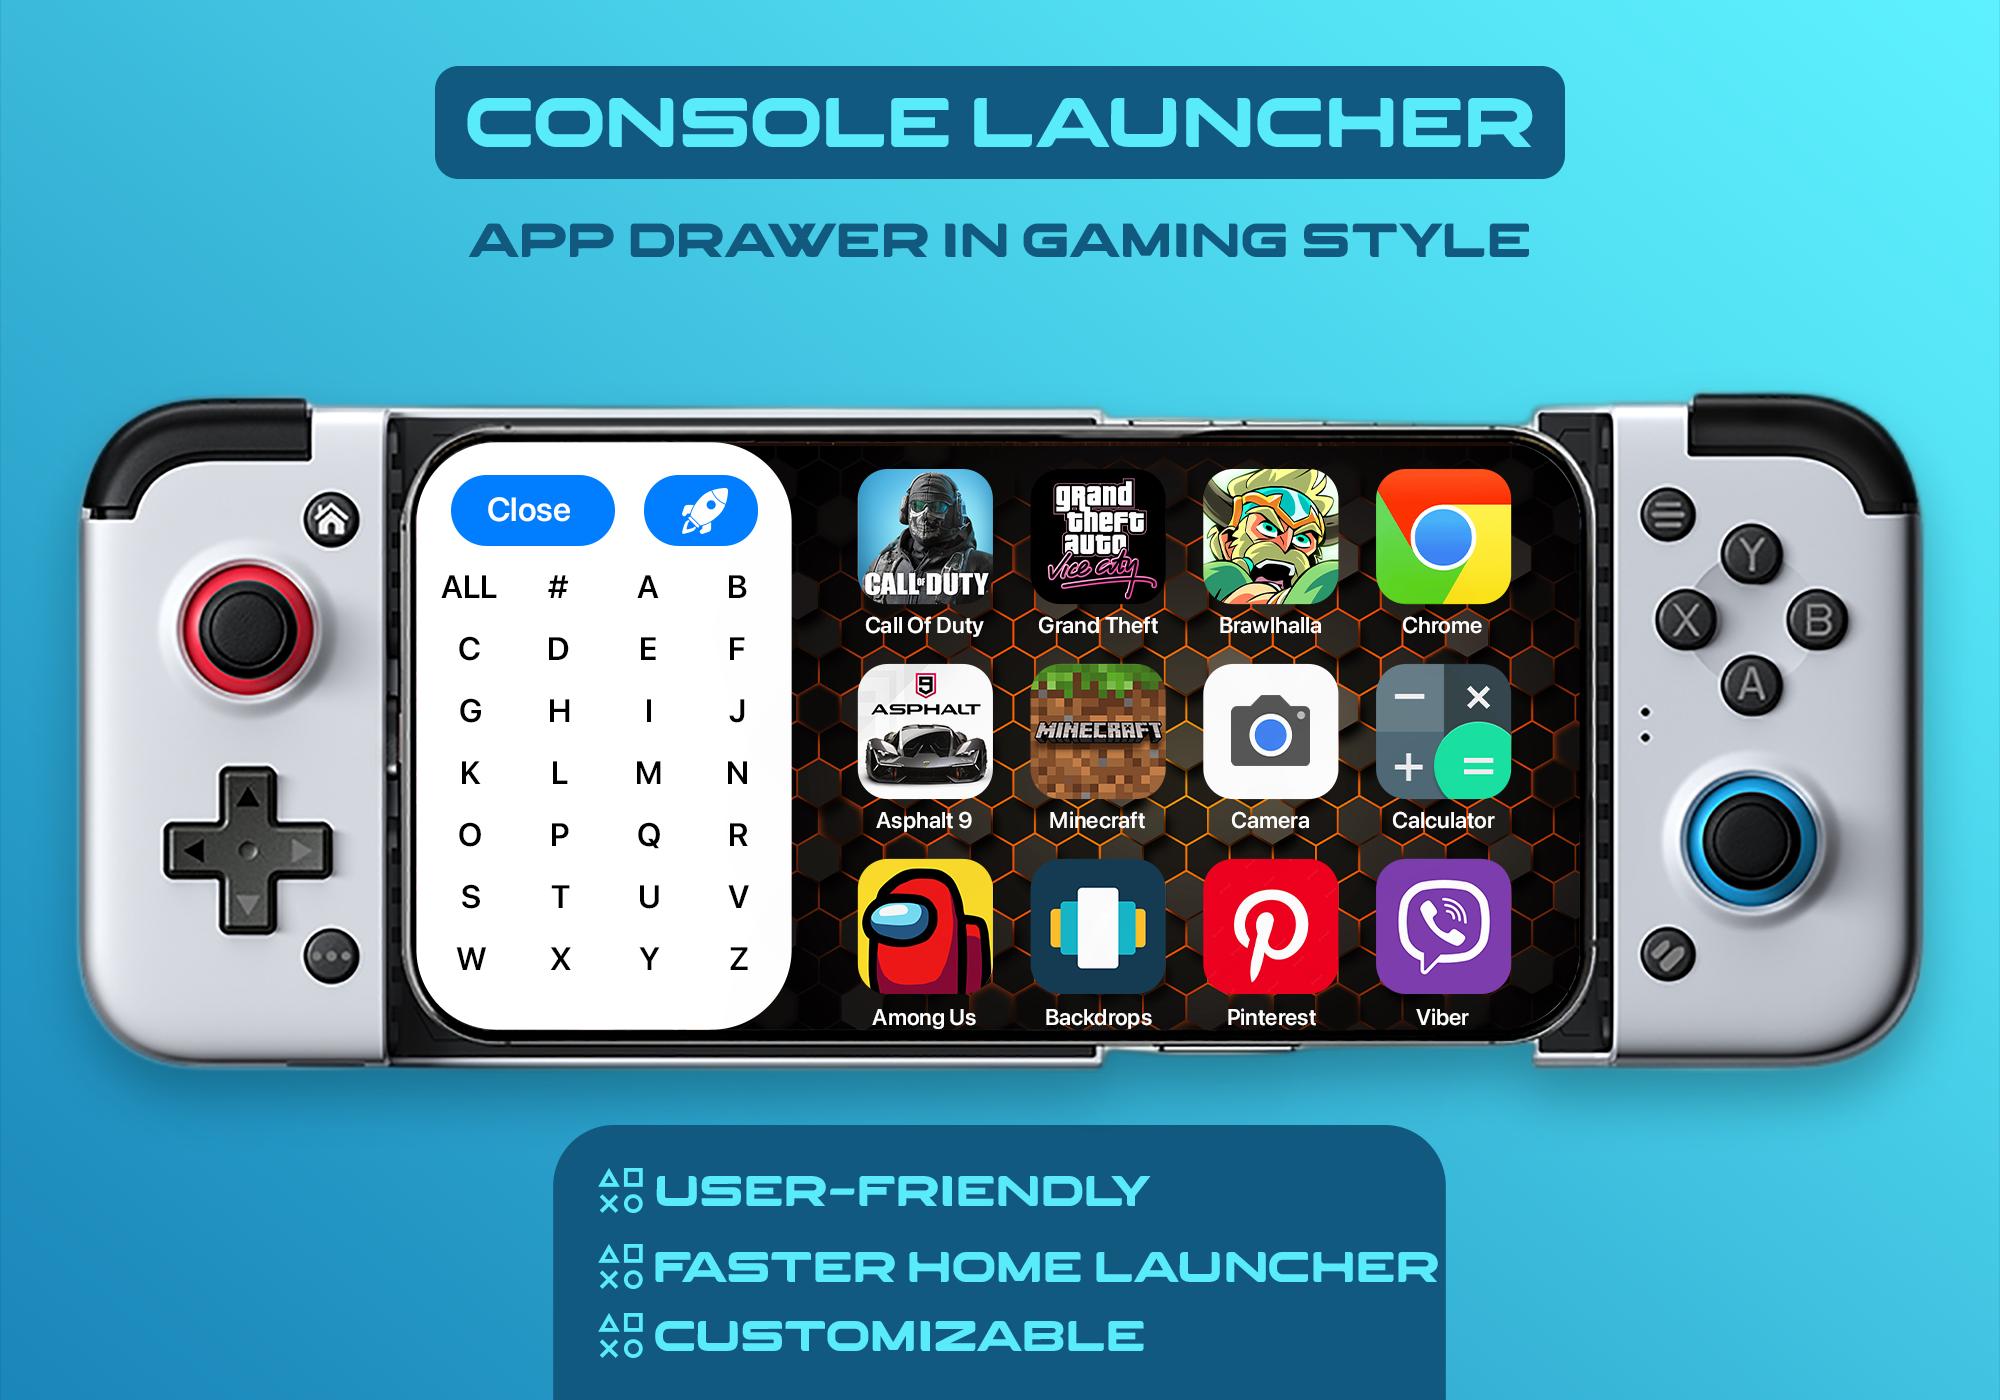 Game booster launcher. Creative Console Launcher. Status: Launched Consol.